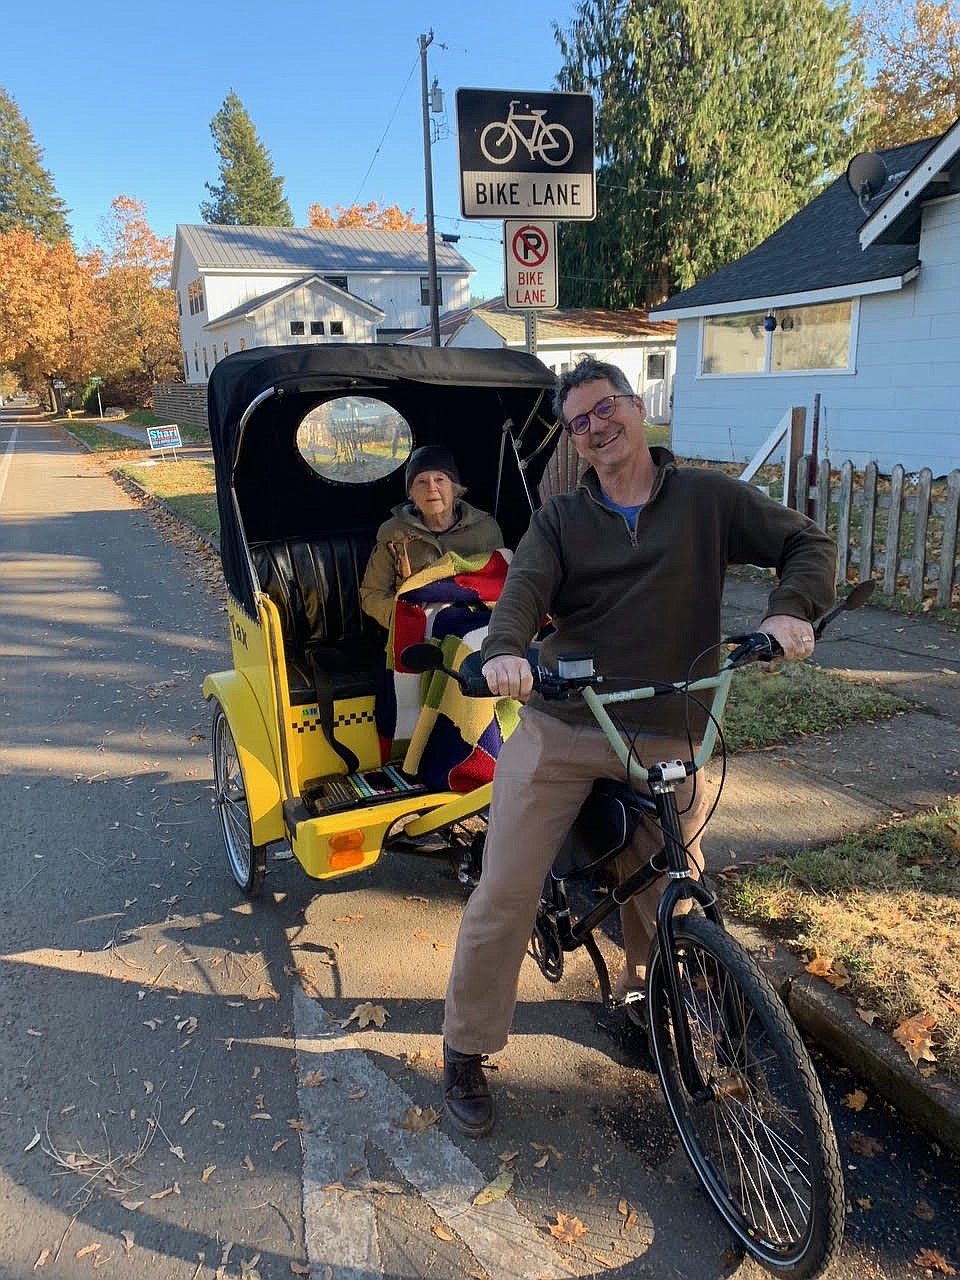 Dave Passaro's brother Bob takes their mom, Jean, for a bike ride last fall. Jean was evicted from a memory care unit because of behaviors that Dave believes were brought on by isolation and other problems tied to COVID restrictions on visitation for memory care patients.